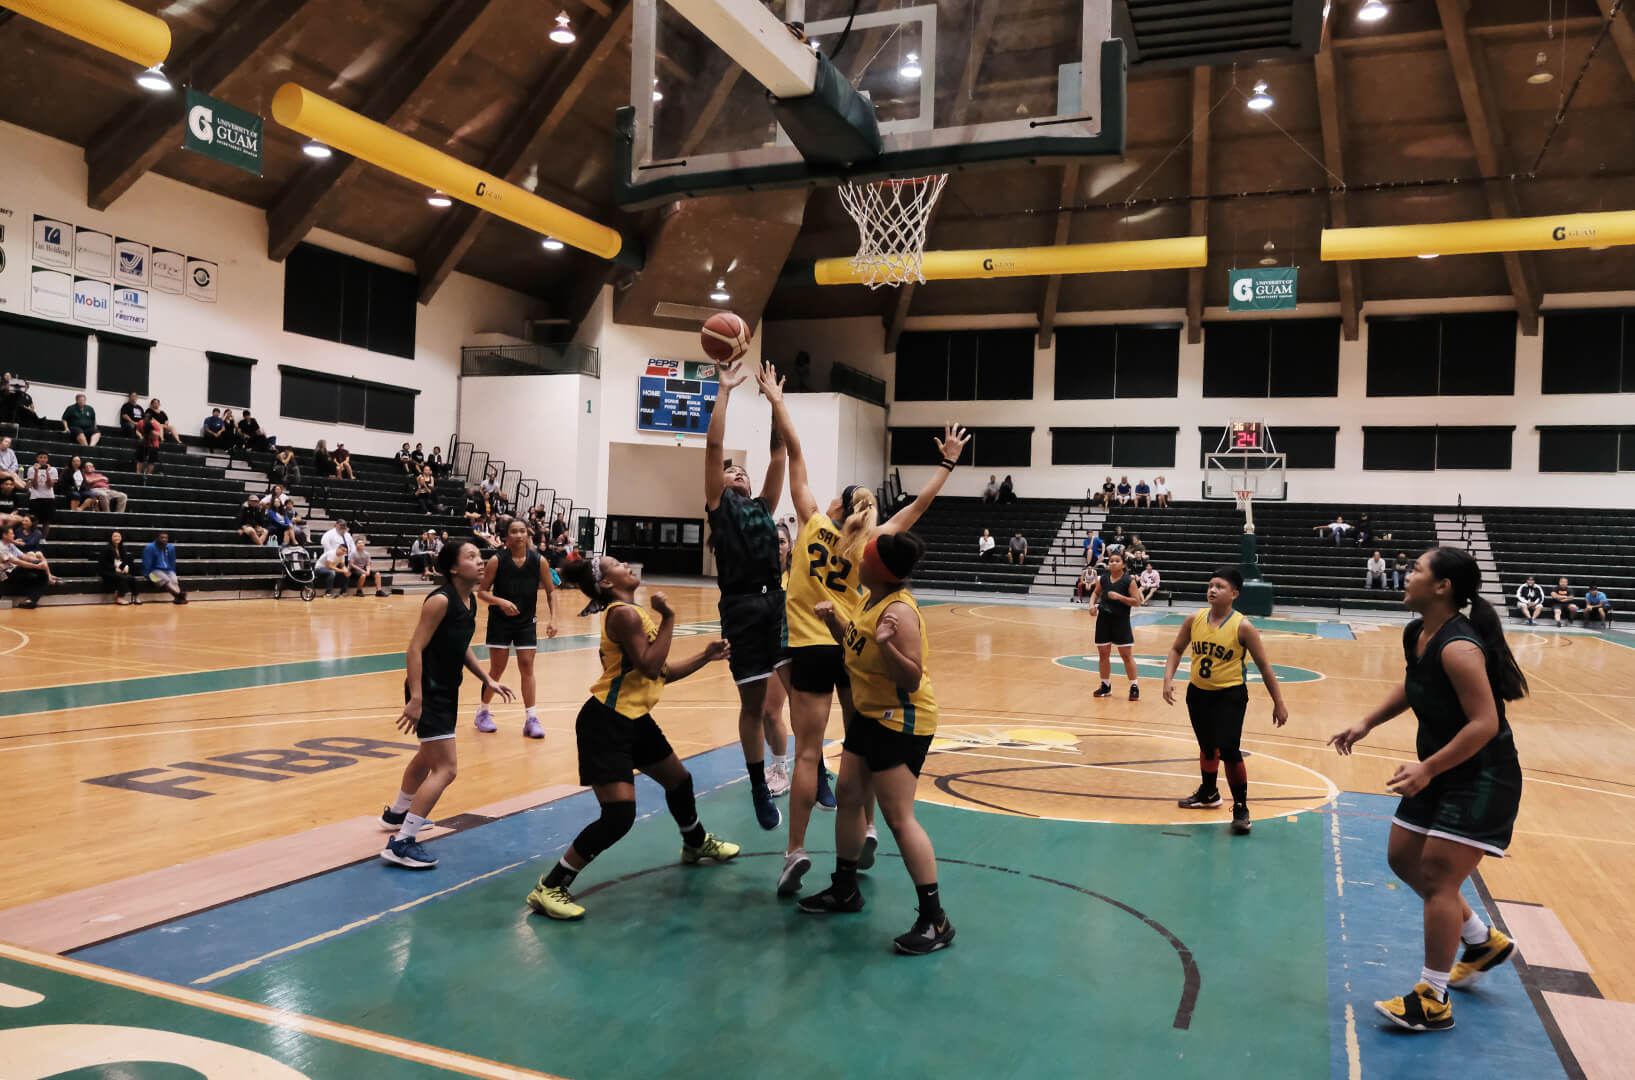 Niah Siguenza of the UOG Tritons goes up for a two-point basket against her opponent.